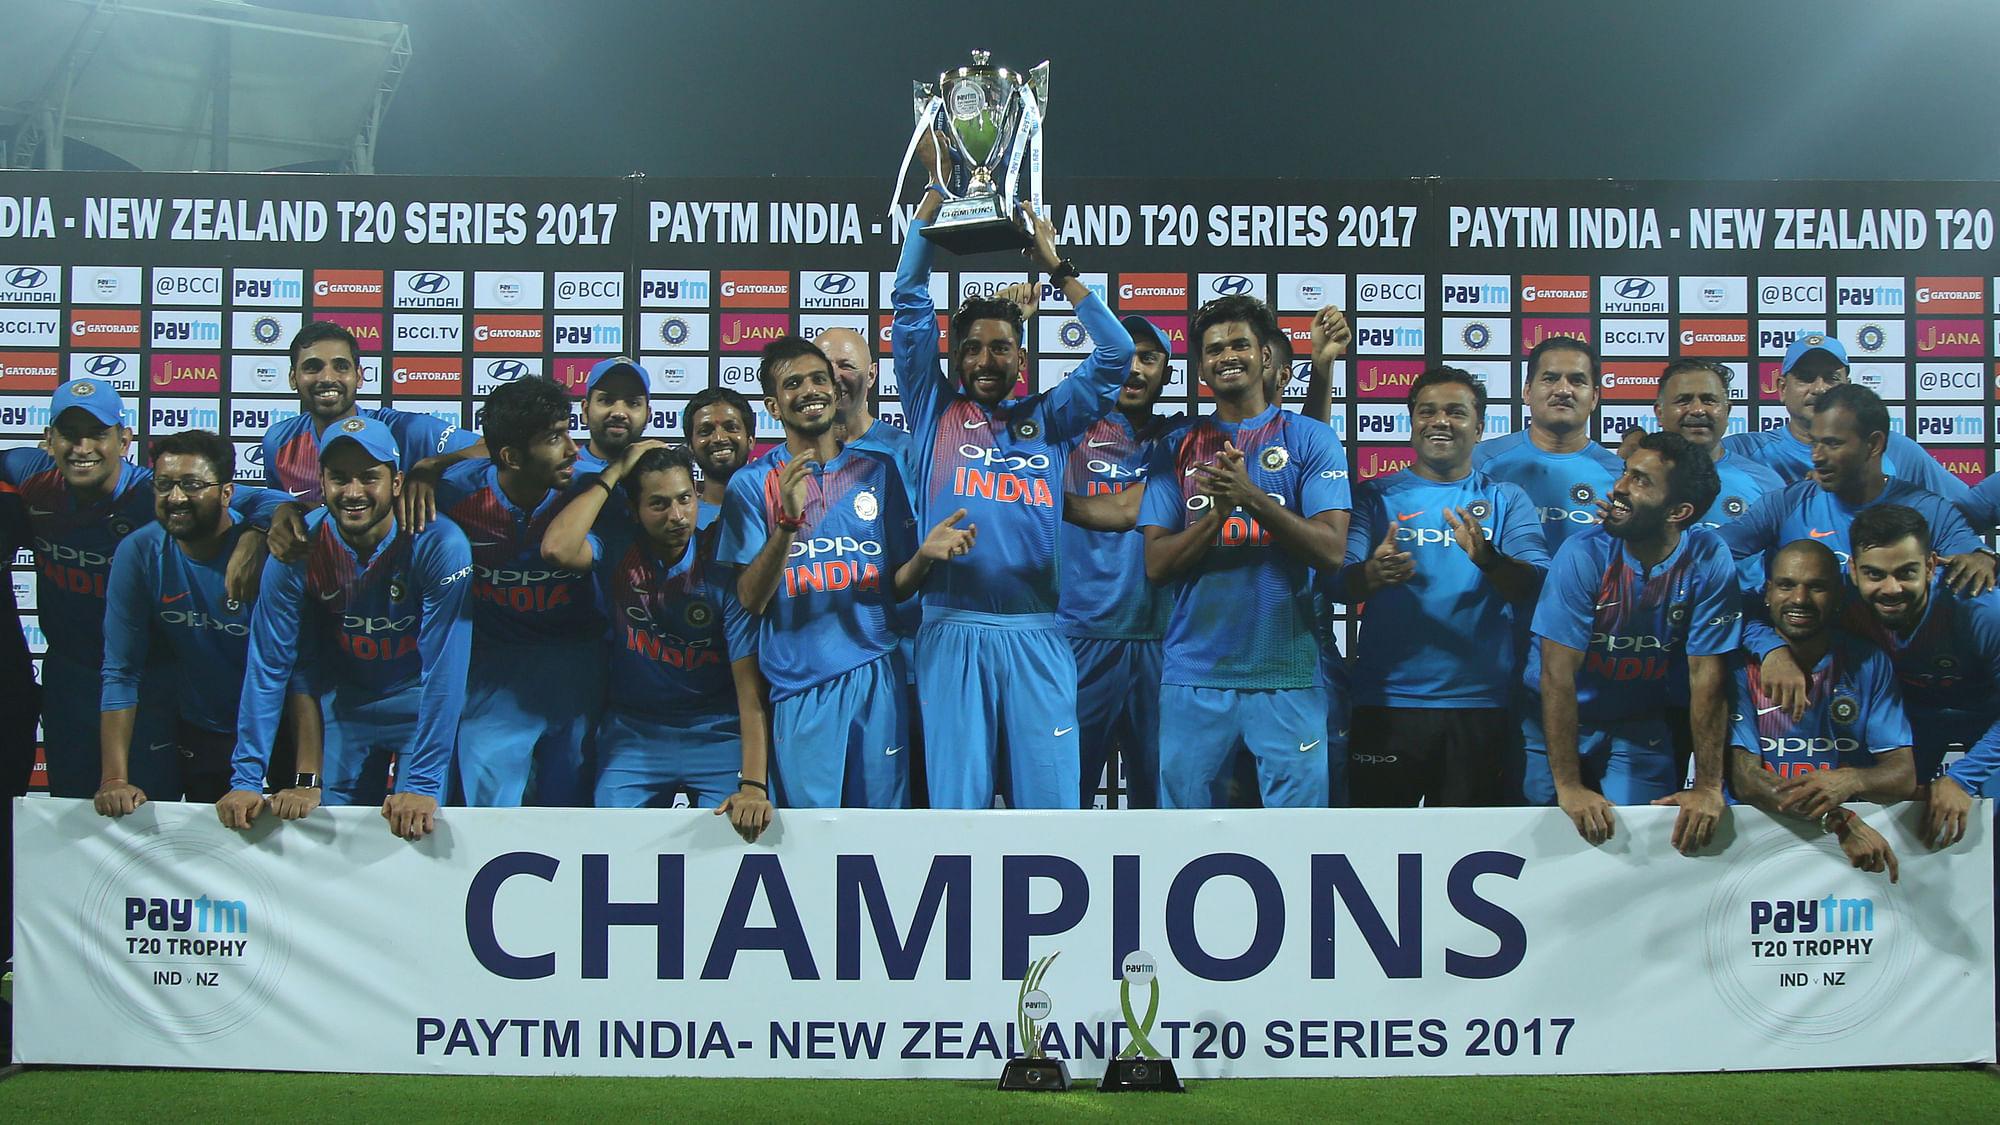 The Indian team poses for a photograph after winning the T20 series against New Zealand.